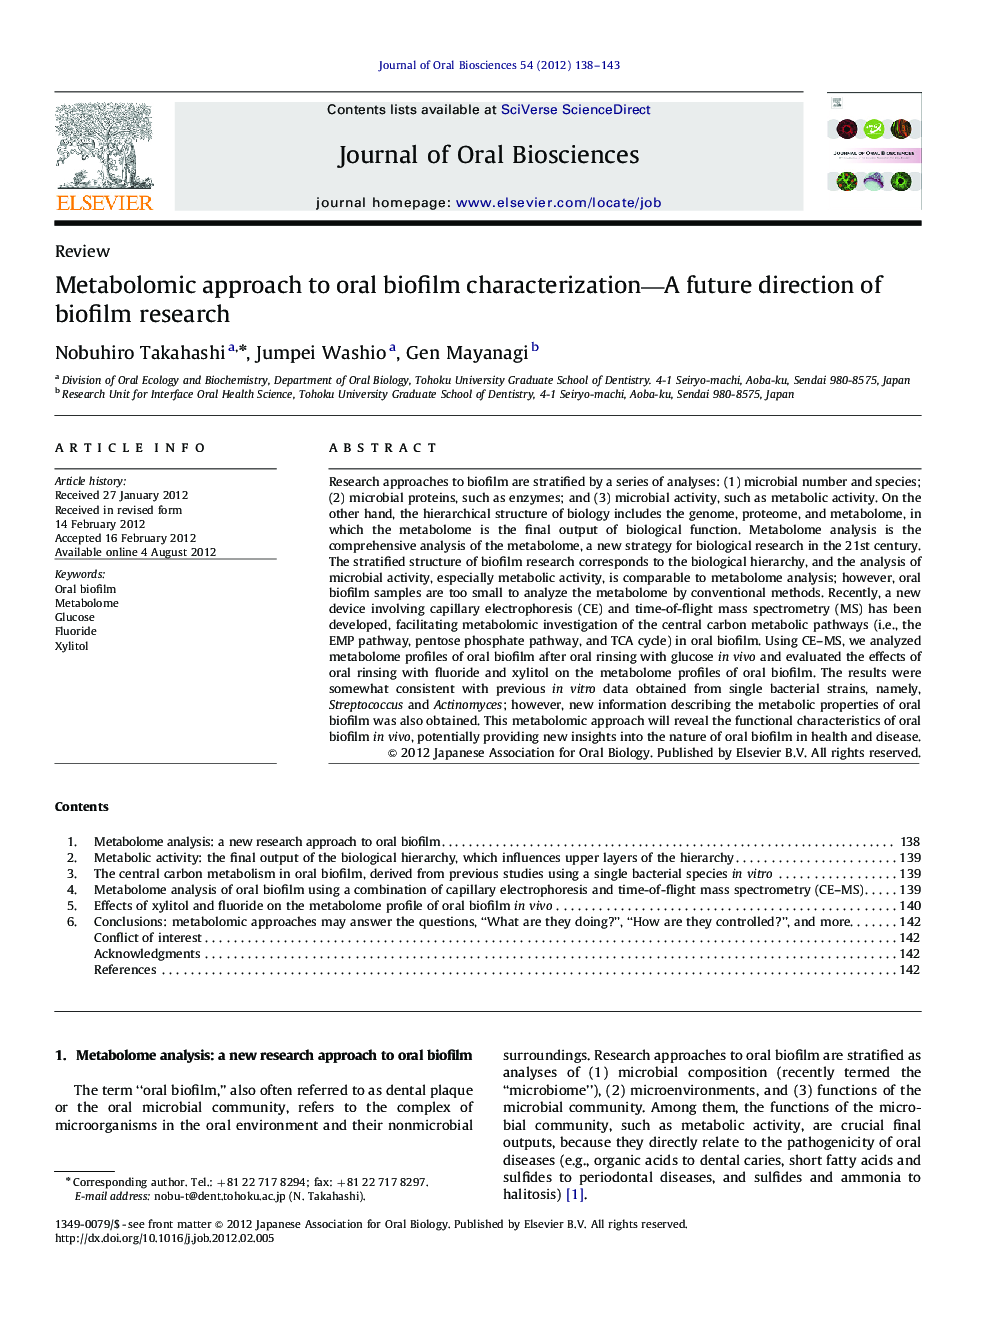 Metabolomic approach to oral biofilm characterization-A future direction of biofilm research